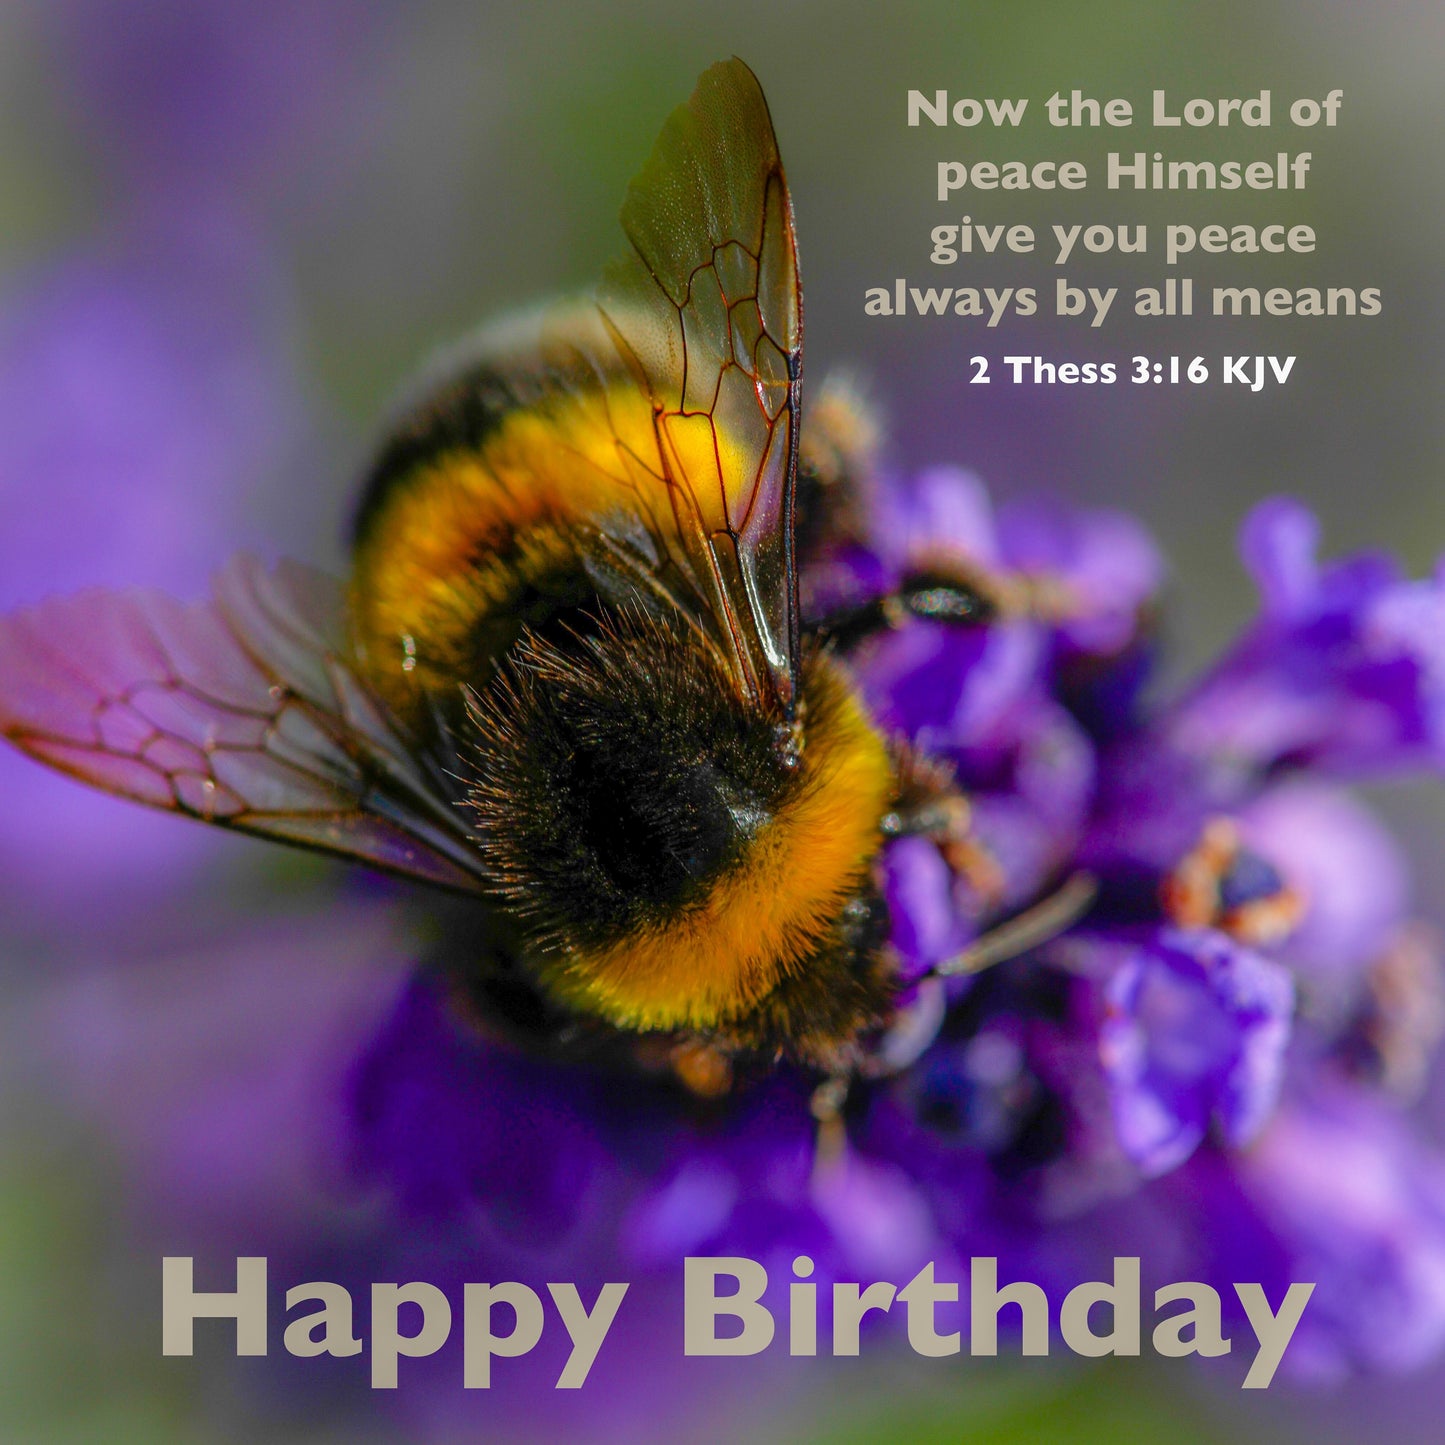 Bumble Bee Birthday Card - The Christian Gift Company